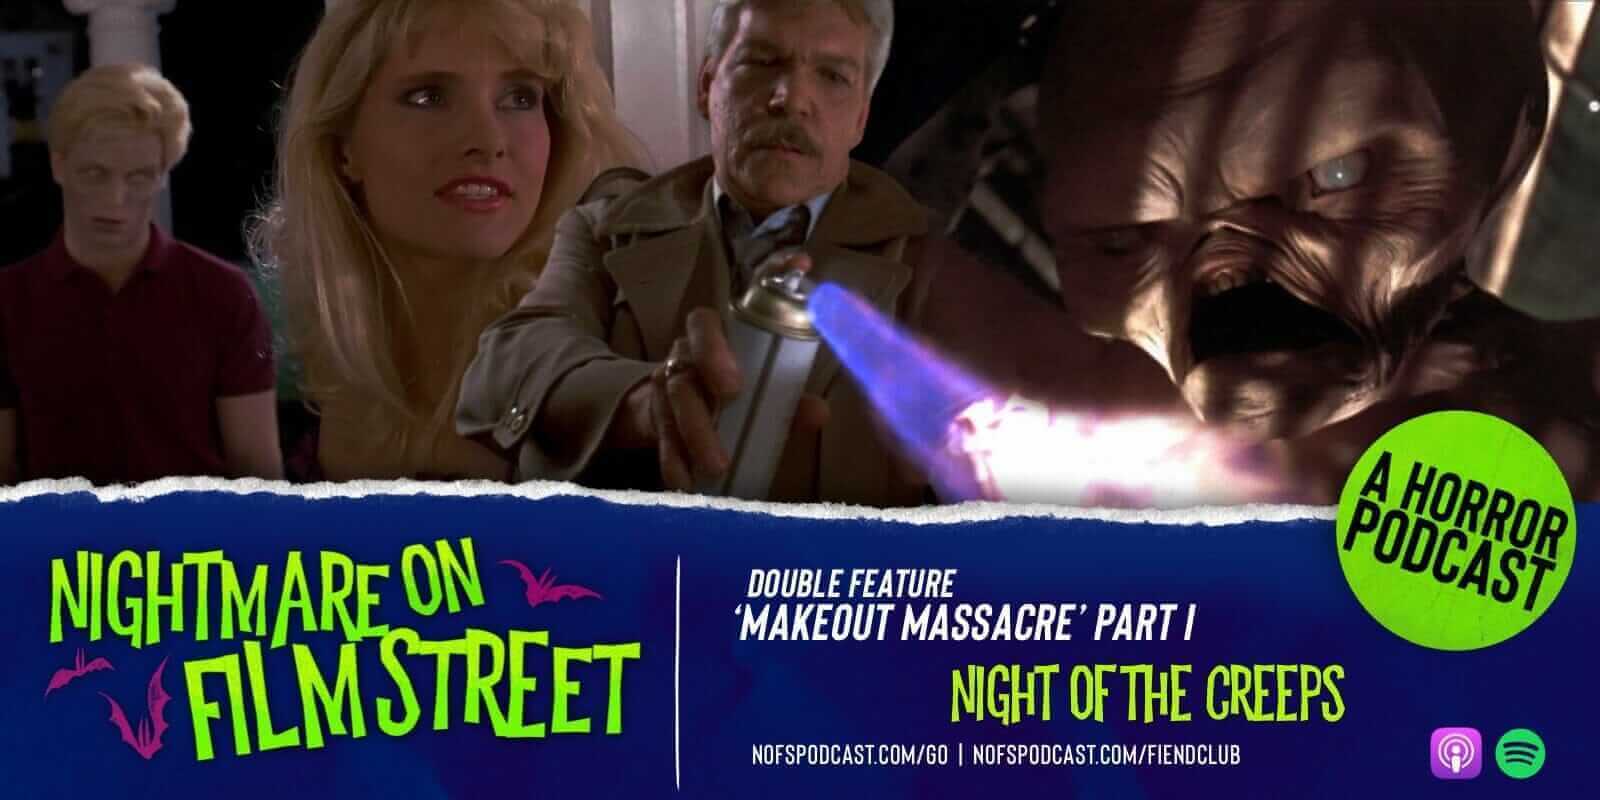 Nightmare on Film Street Podcast - night of the creeps - make out massacre part 1 (2)